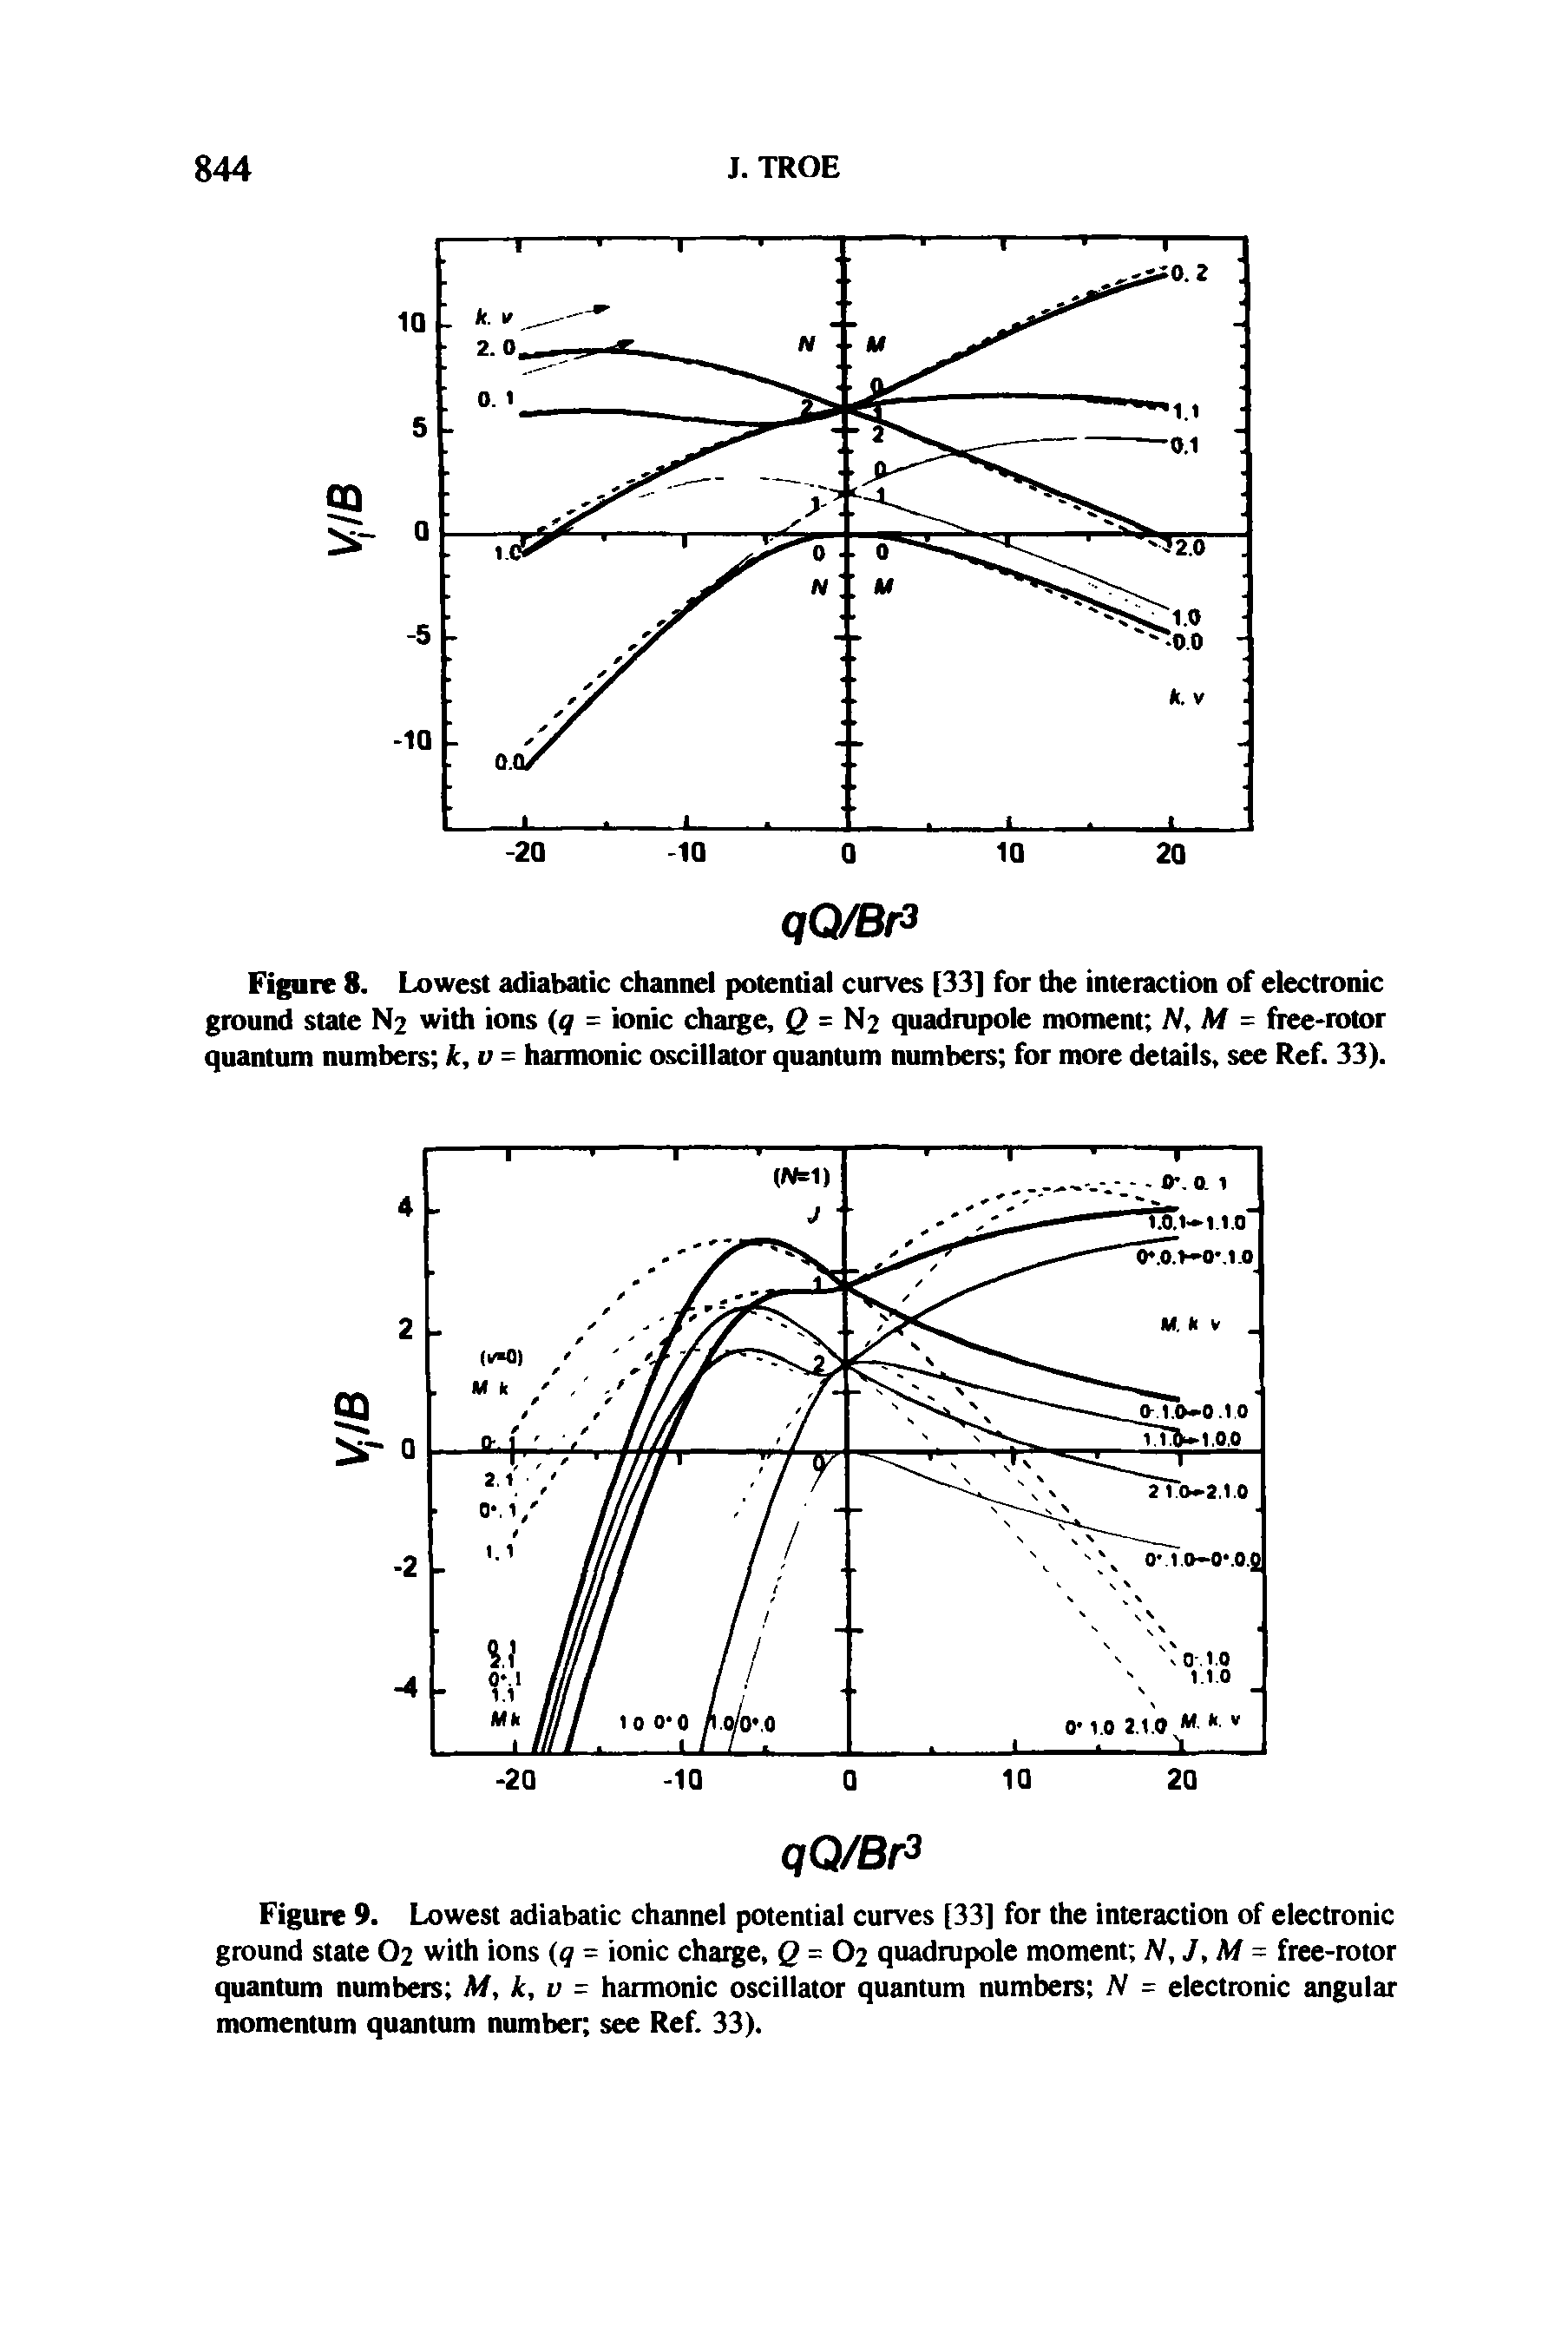 Figure 8. Lowest adiabatic channel potential curves [33] for the interaction of electronic ground state N2 with ions (q = ionic charge, Q = N2 quadnipole moment N, M = free-rotor quantum numbers k,v = harmonic oscillator quantum numbers for more details, see Ref. 33).